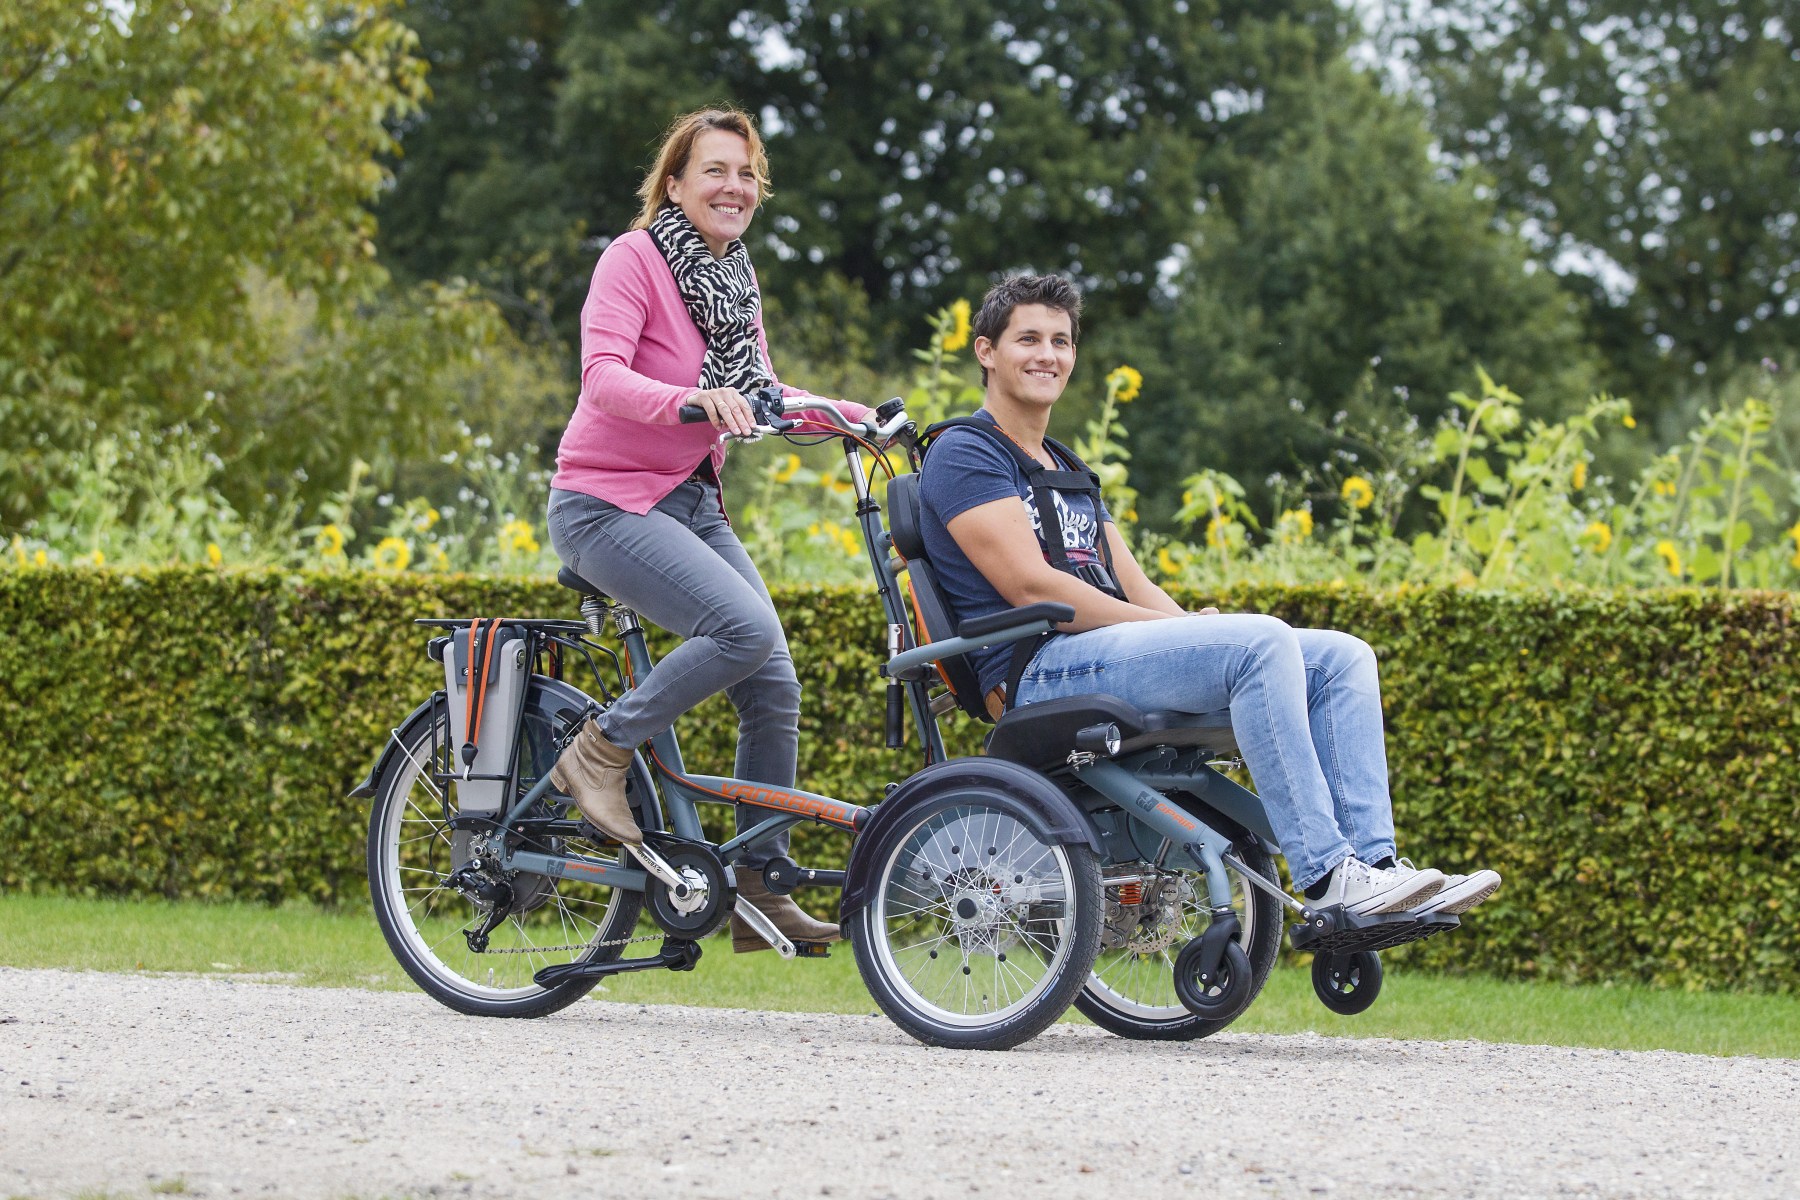 Two people on a Van Raam OPair bike, cycling through a park. They are smiling at something beyond the camera.